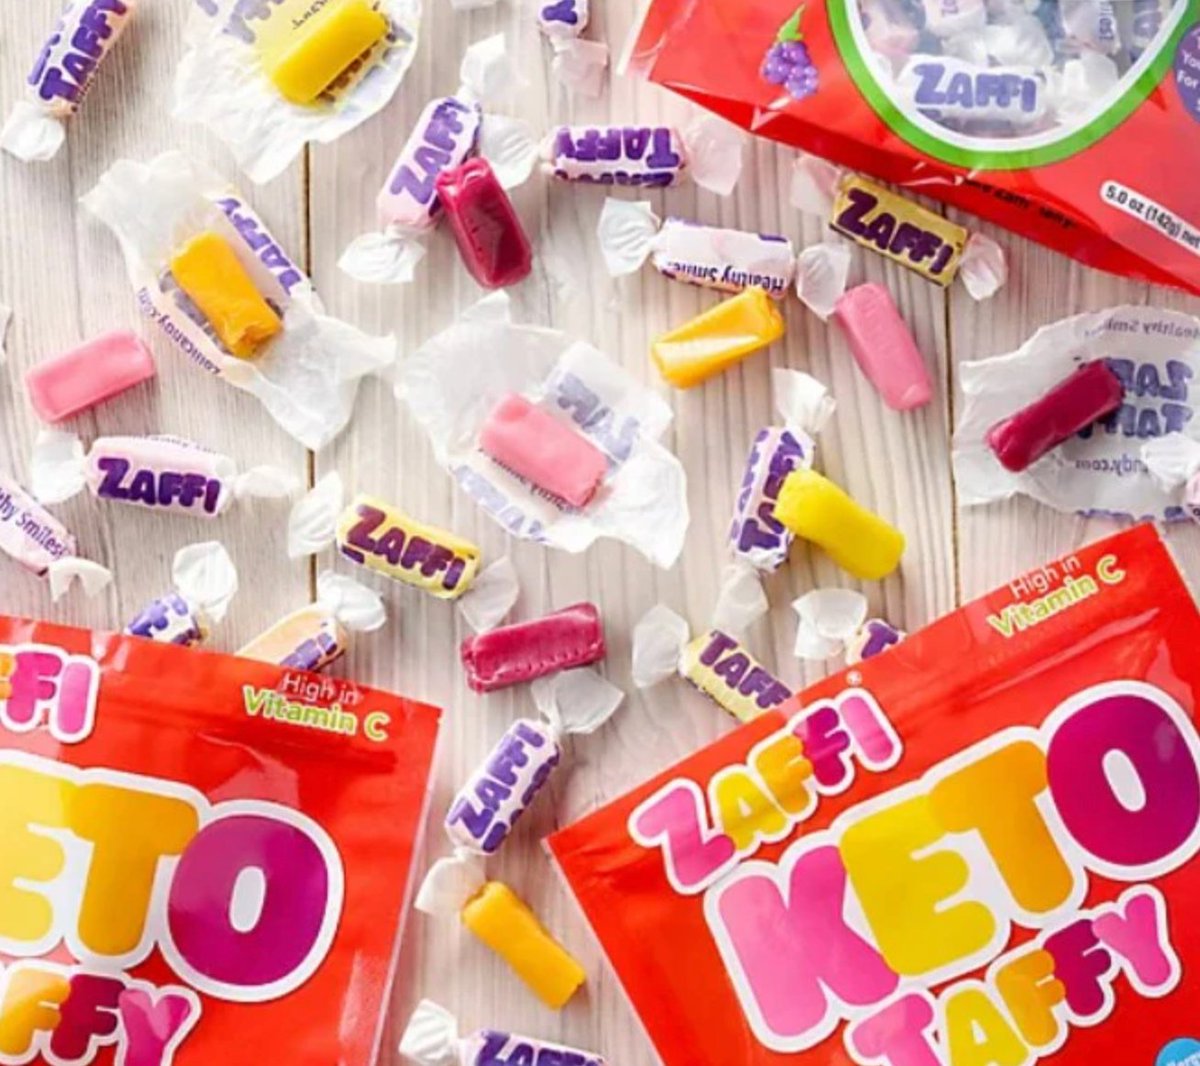 FREE Healthy Snack Boxes! bit.ly/3RSiEcA 🎉

A delicious gooey Taffy with zero sugar .. Yes it's true @Zollipops KETO Zaffi Taffy is the smartest & yummiest taffy on Earth! 😋🍬

Can't wait? Use this coupon code for 15% Off: Goodie15 bit.ly/3N8NsSA